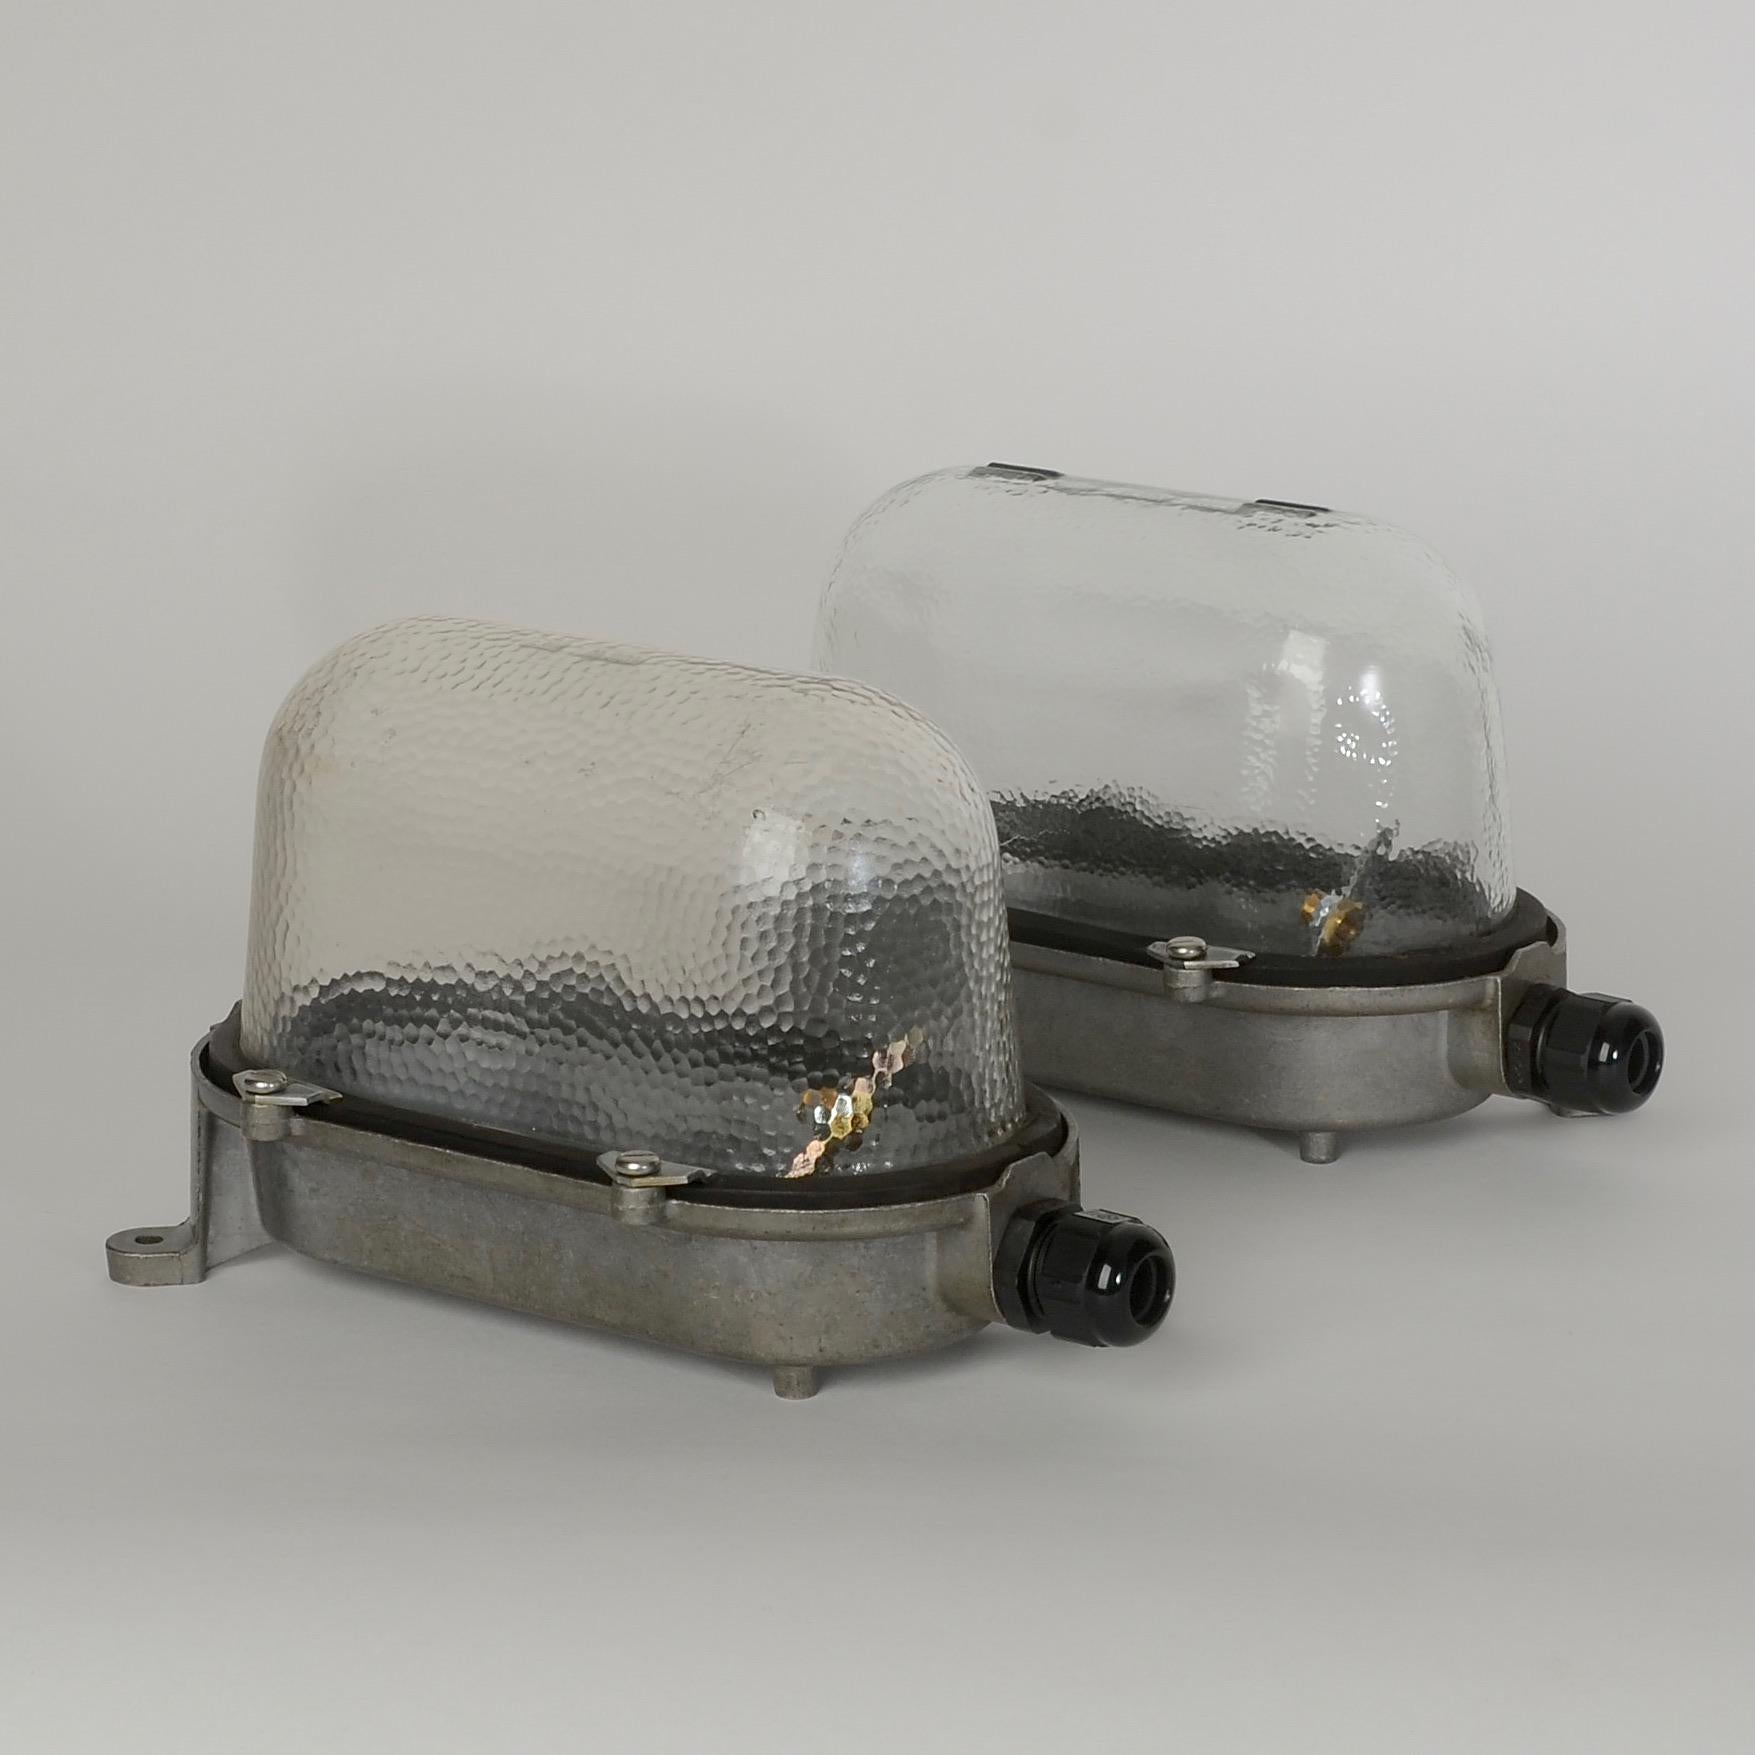 Vintage bulkhead wall lights salvaged from an industrial building in Eastern Germany. Manufactured by EOW in the communist period.

Deep-profile bubbled glass domes mounted on cast-aluminium wall housings that bear the makers mark. IP54 rated.